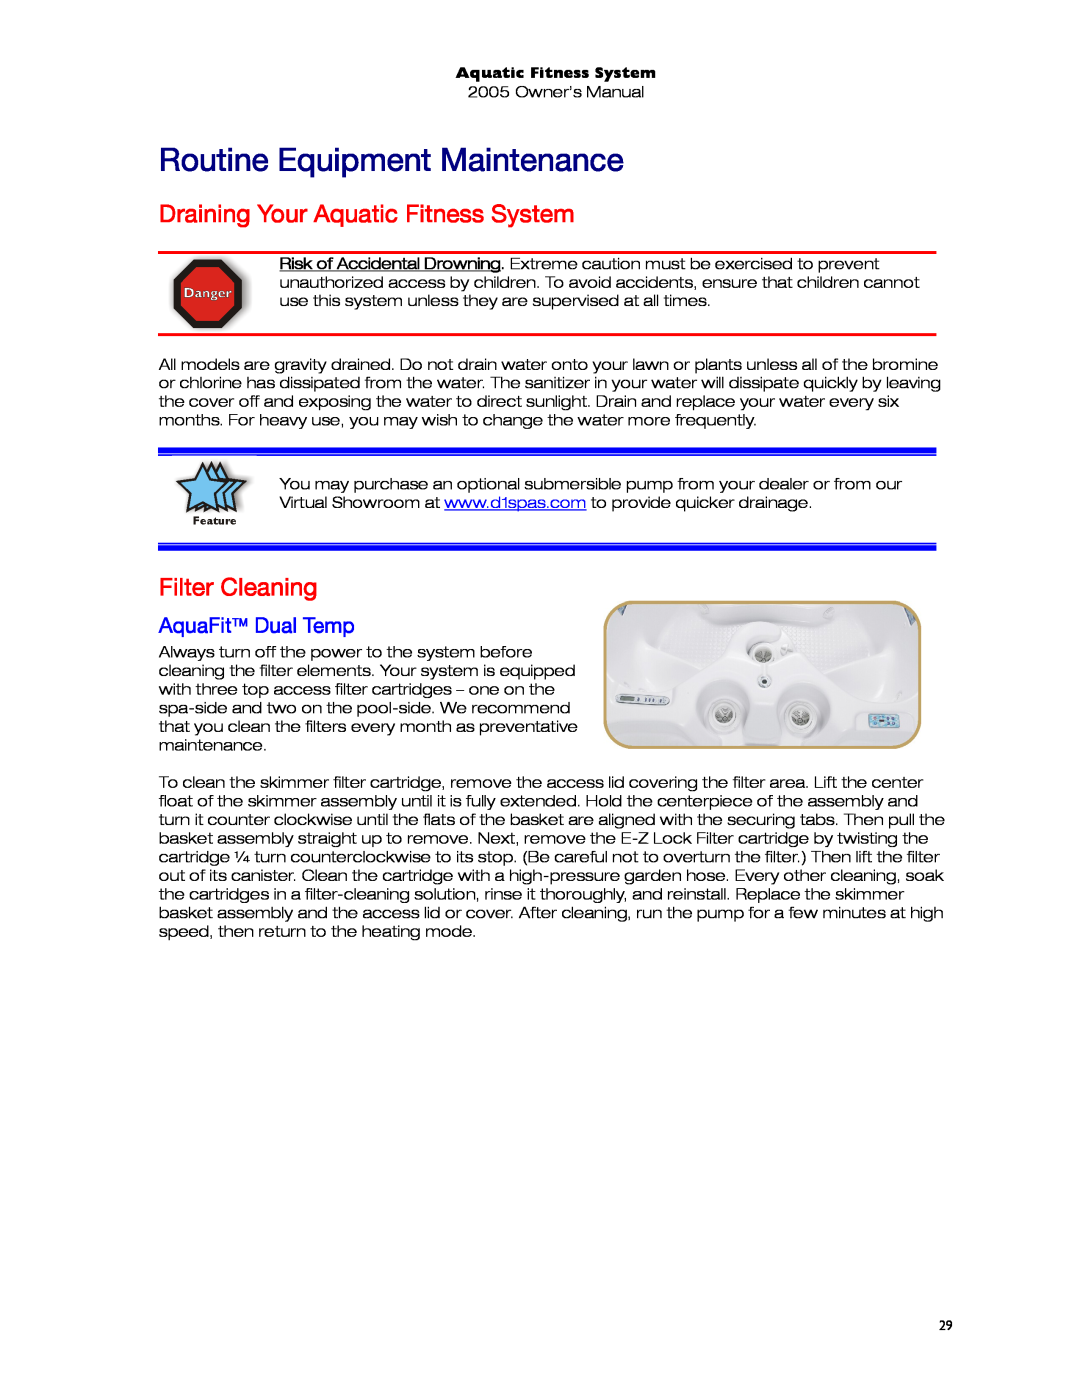 Dimension One Spas 01513-192 manual Routine Equipment Maintenance, Draining Your Aquatic Fitness System, Filter Cleaning 